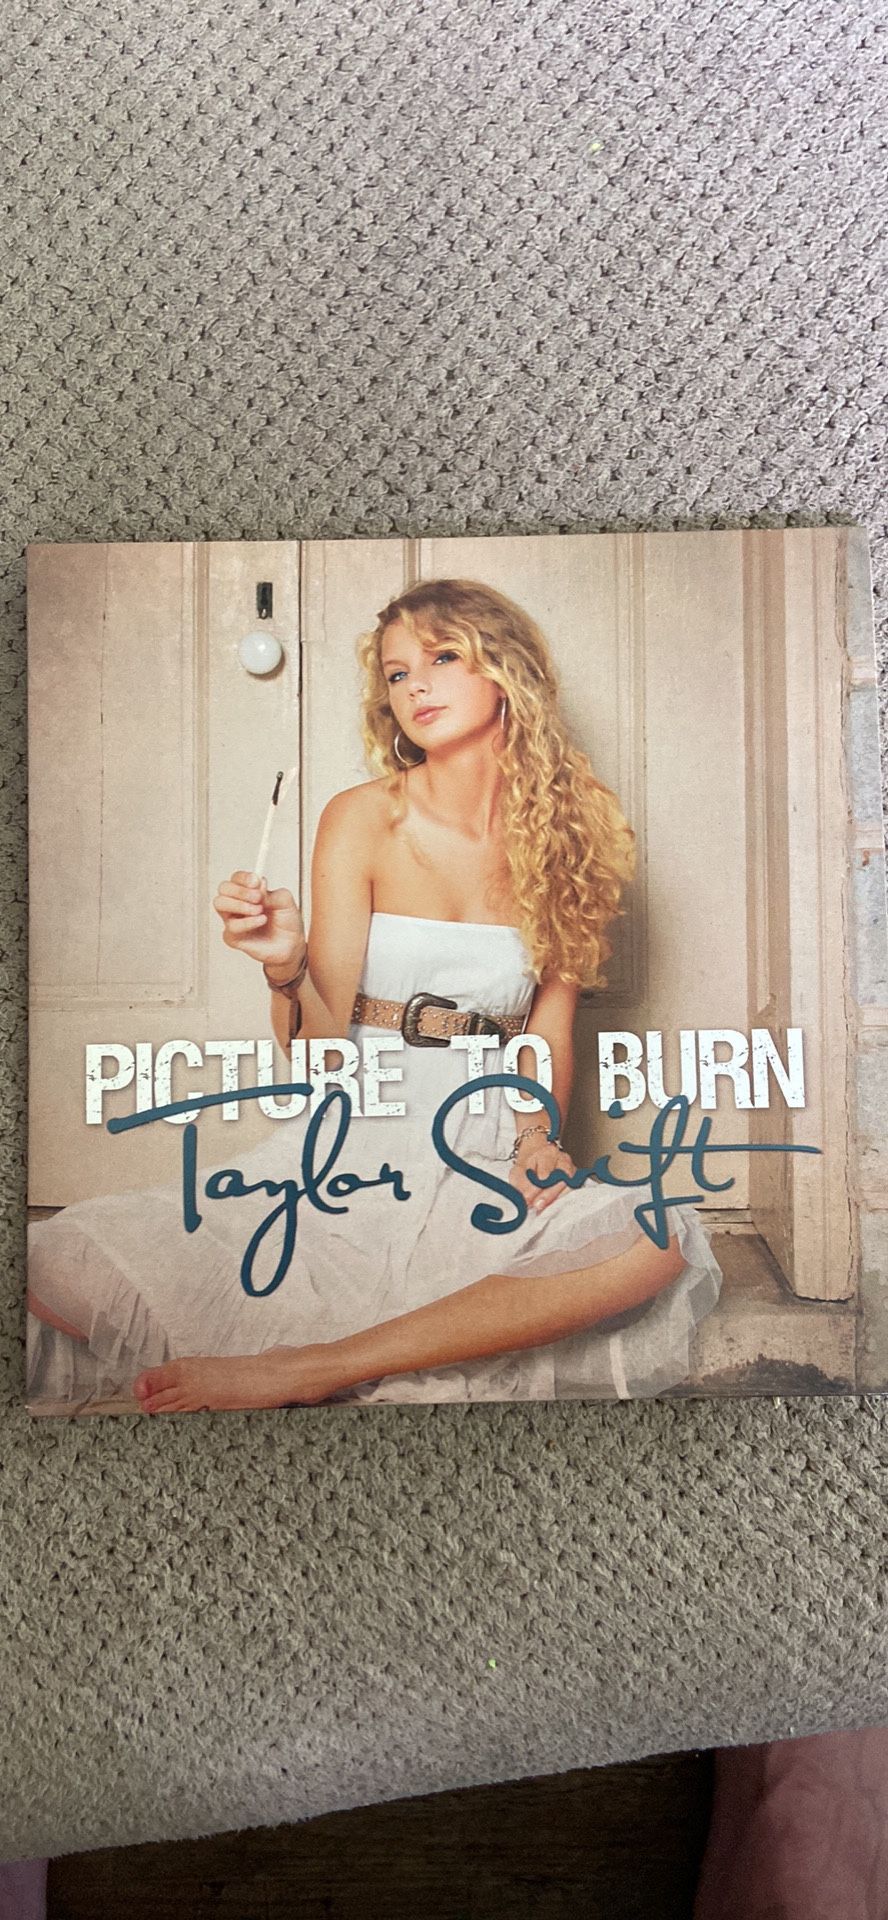 Taylor Swift Picture To Burn Limited Edition LP (One Of 4,000 Copies)